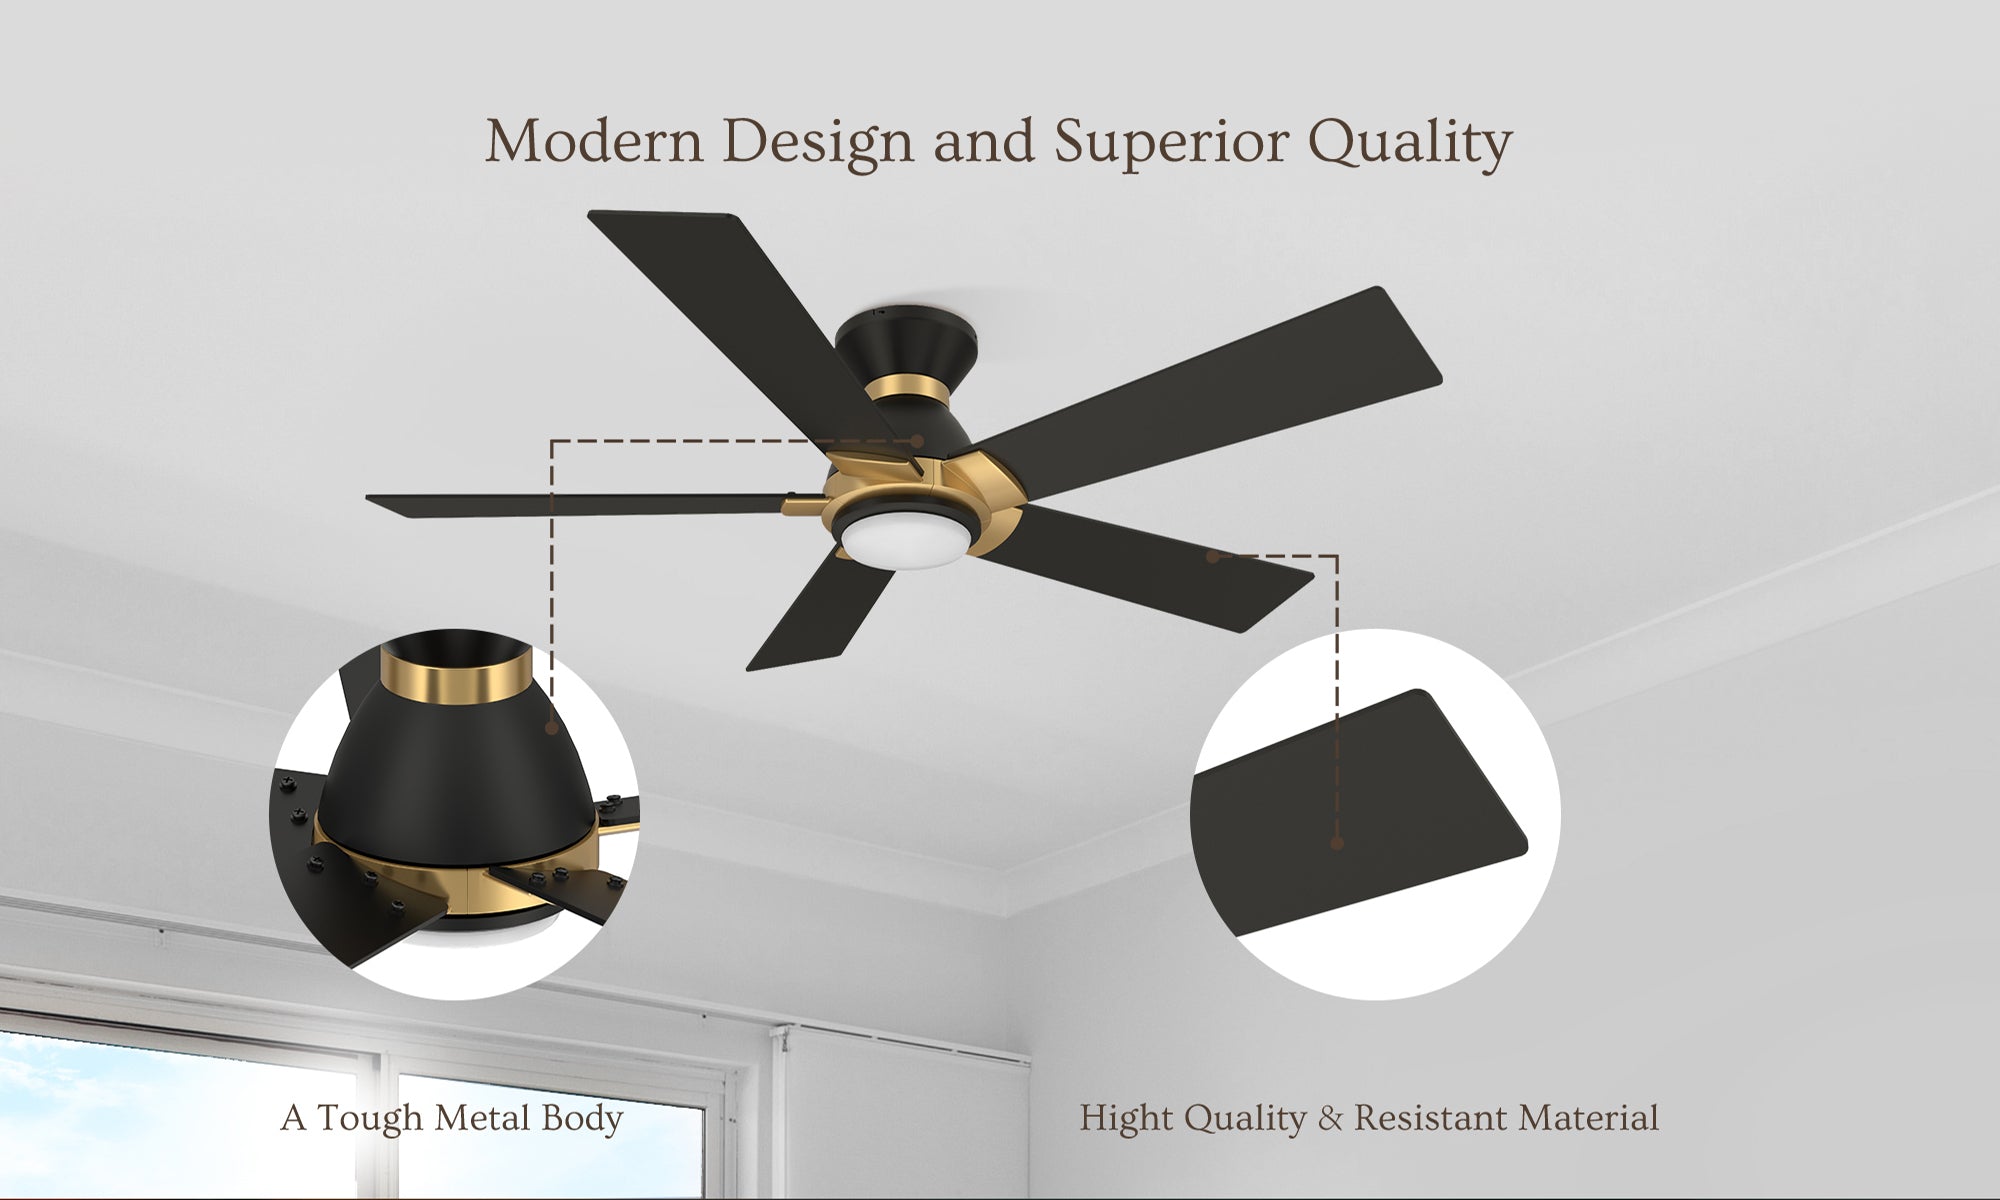 Carro-Smafan-Aspen-10-speed-Ceiling-Fan-with-Remote-and-Reversible-Fan-Blades-brilliant-upscale-design-good-Reliable-Finest-Material